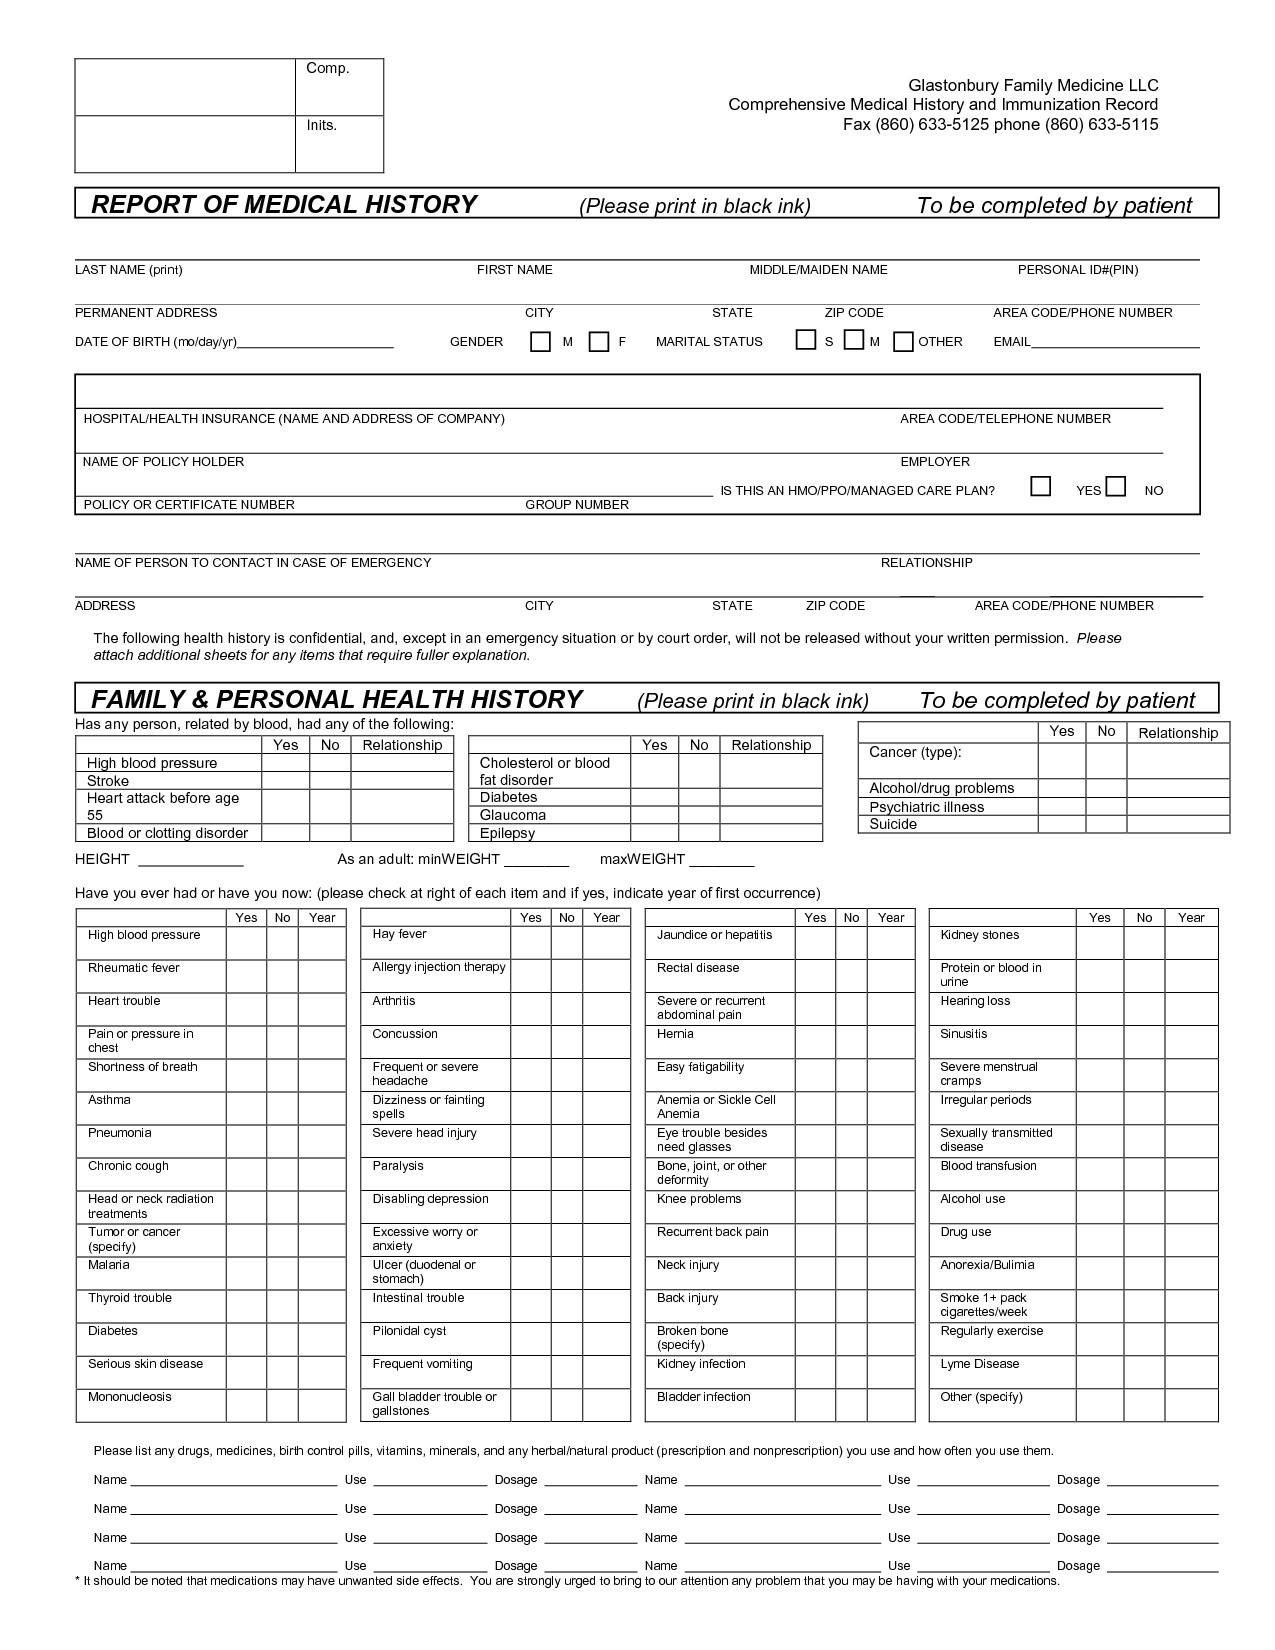 Medical History form Templates Report Of Medical History Family Personal Health History